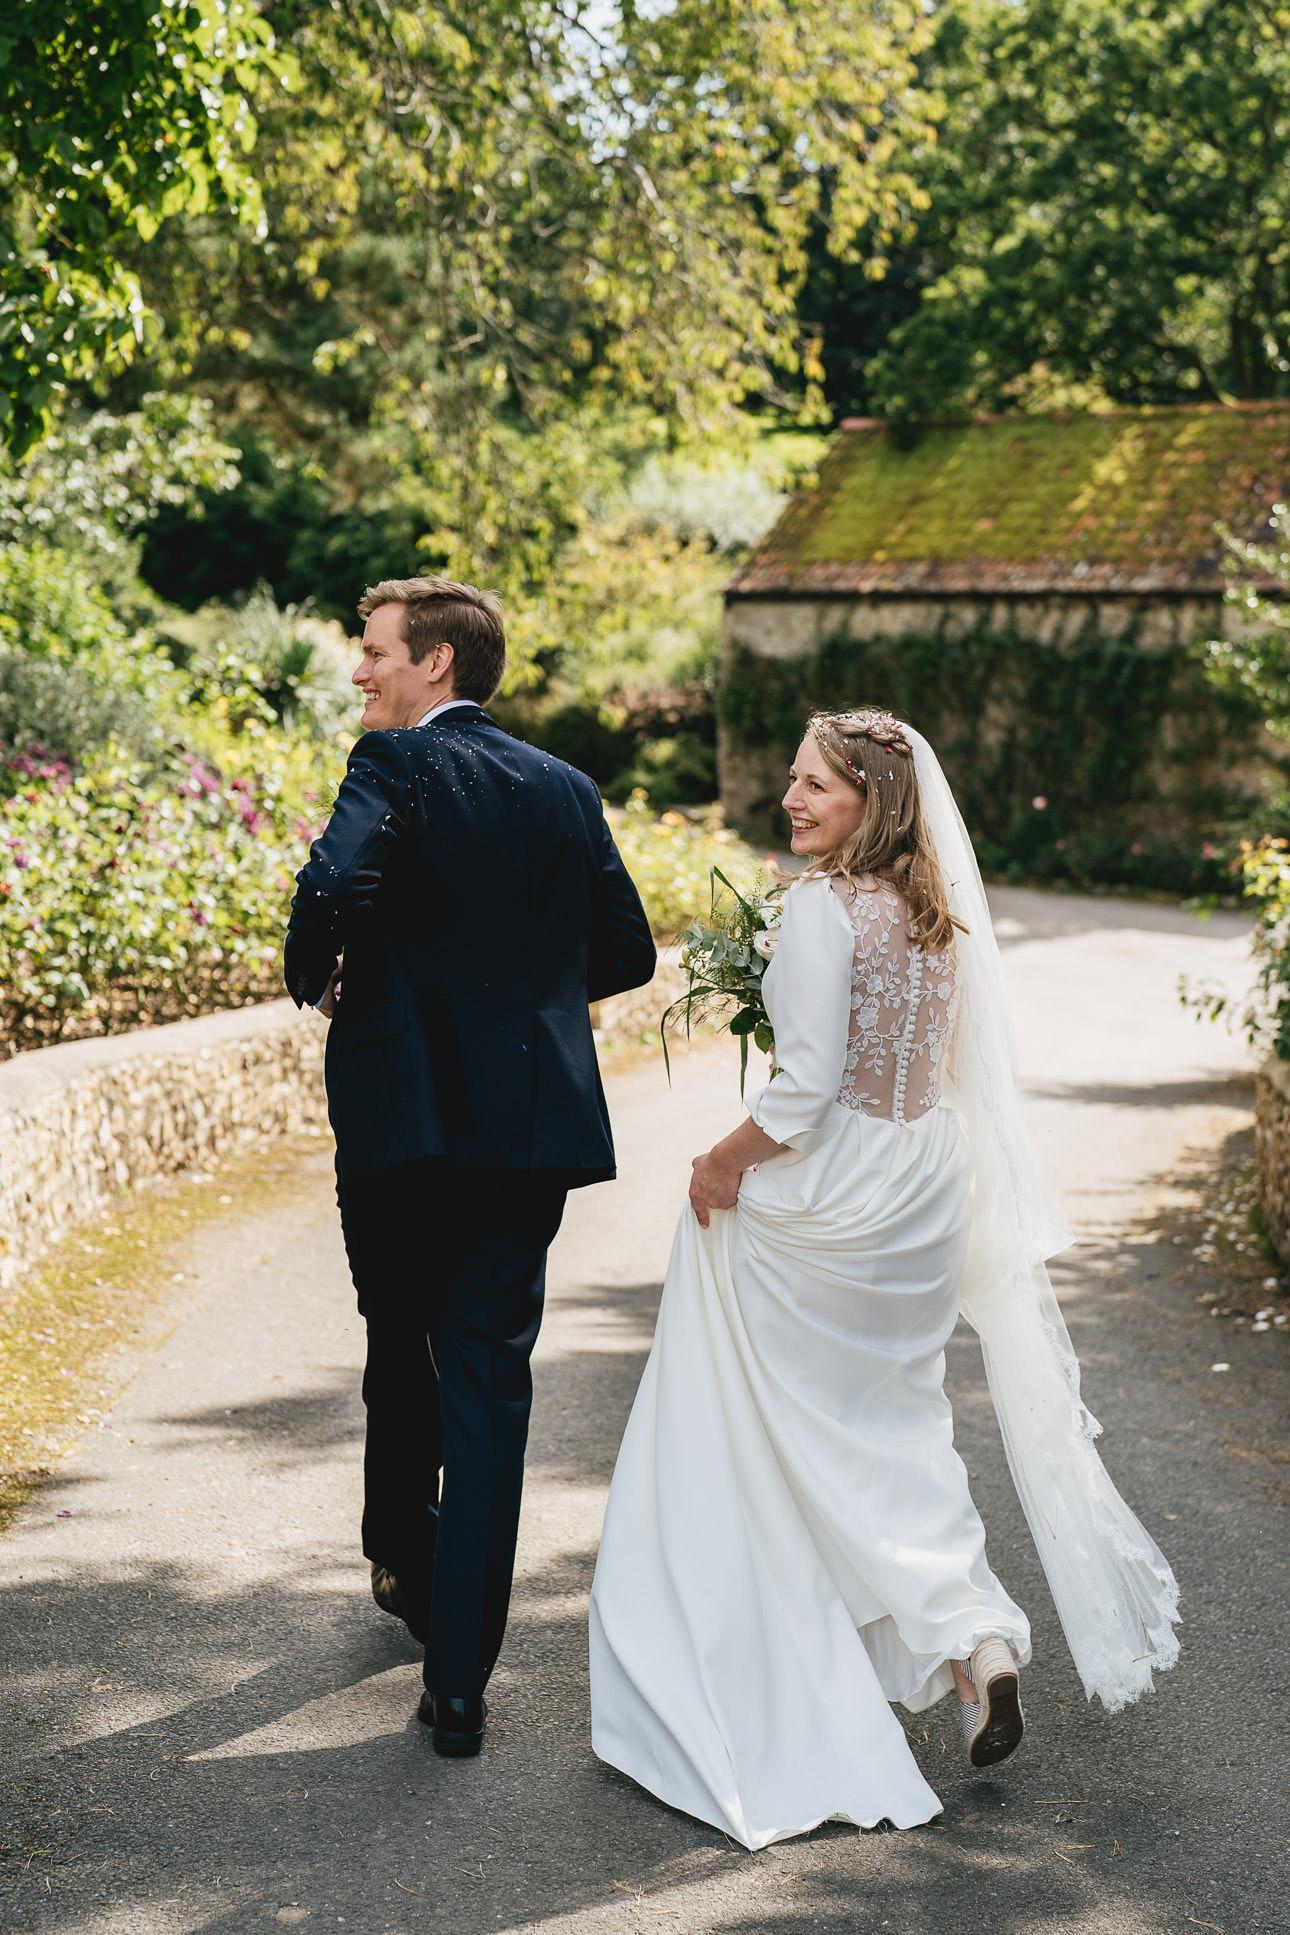 A bride and groom smiling and walking down a country lane together in sunshine after their Devon wedding ceremony